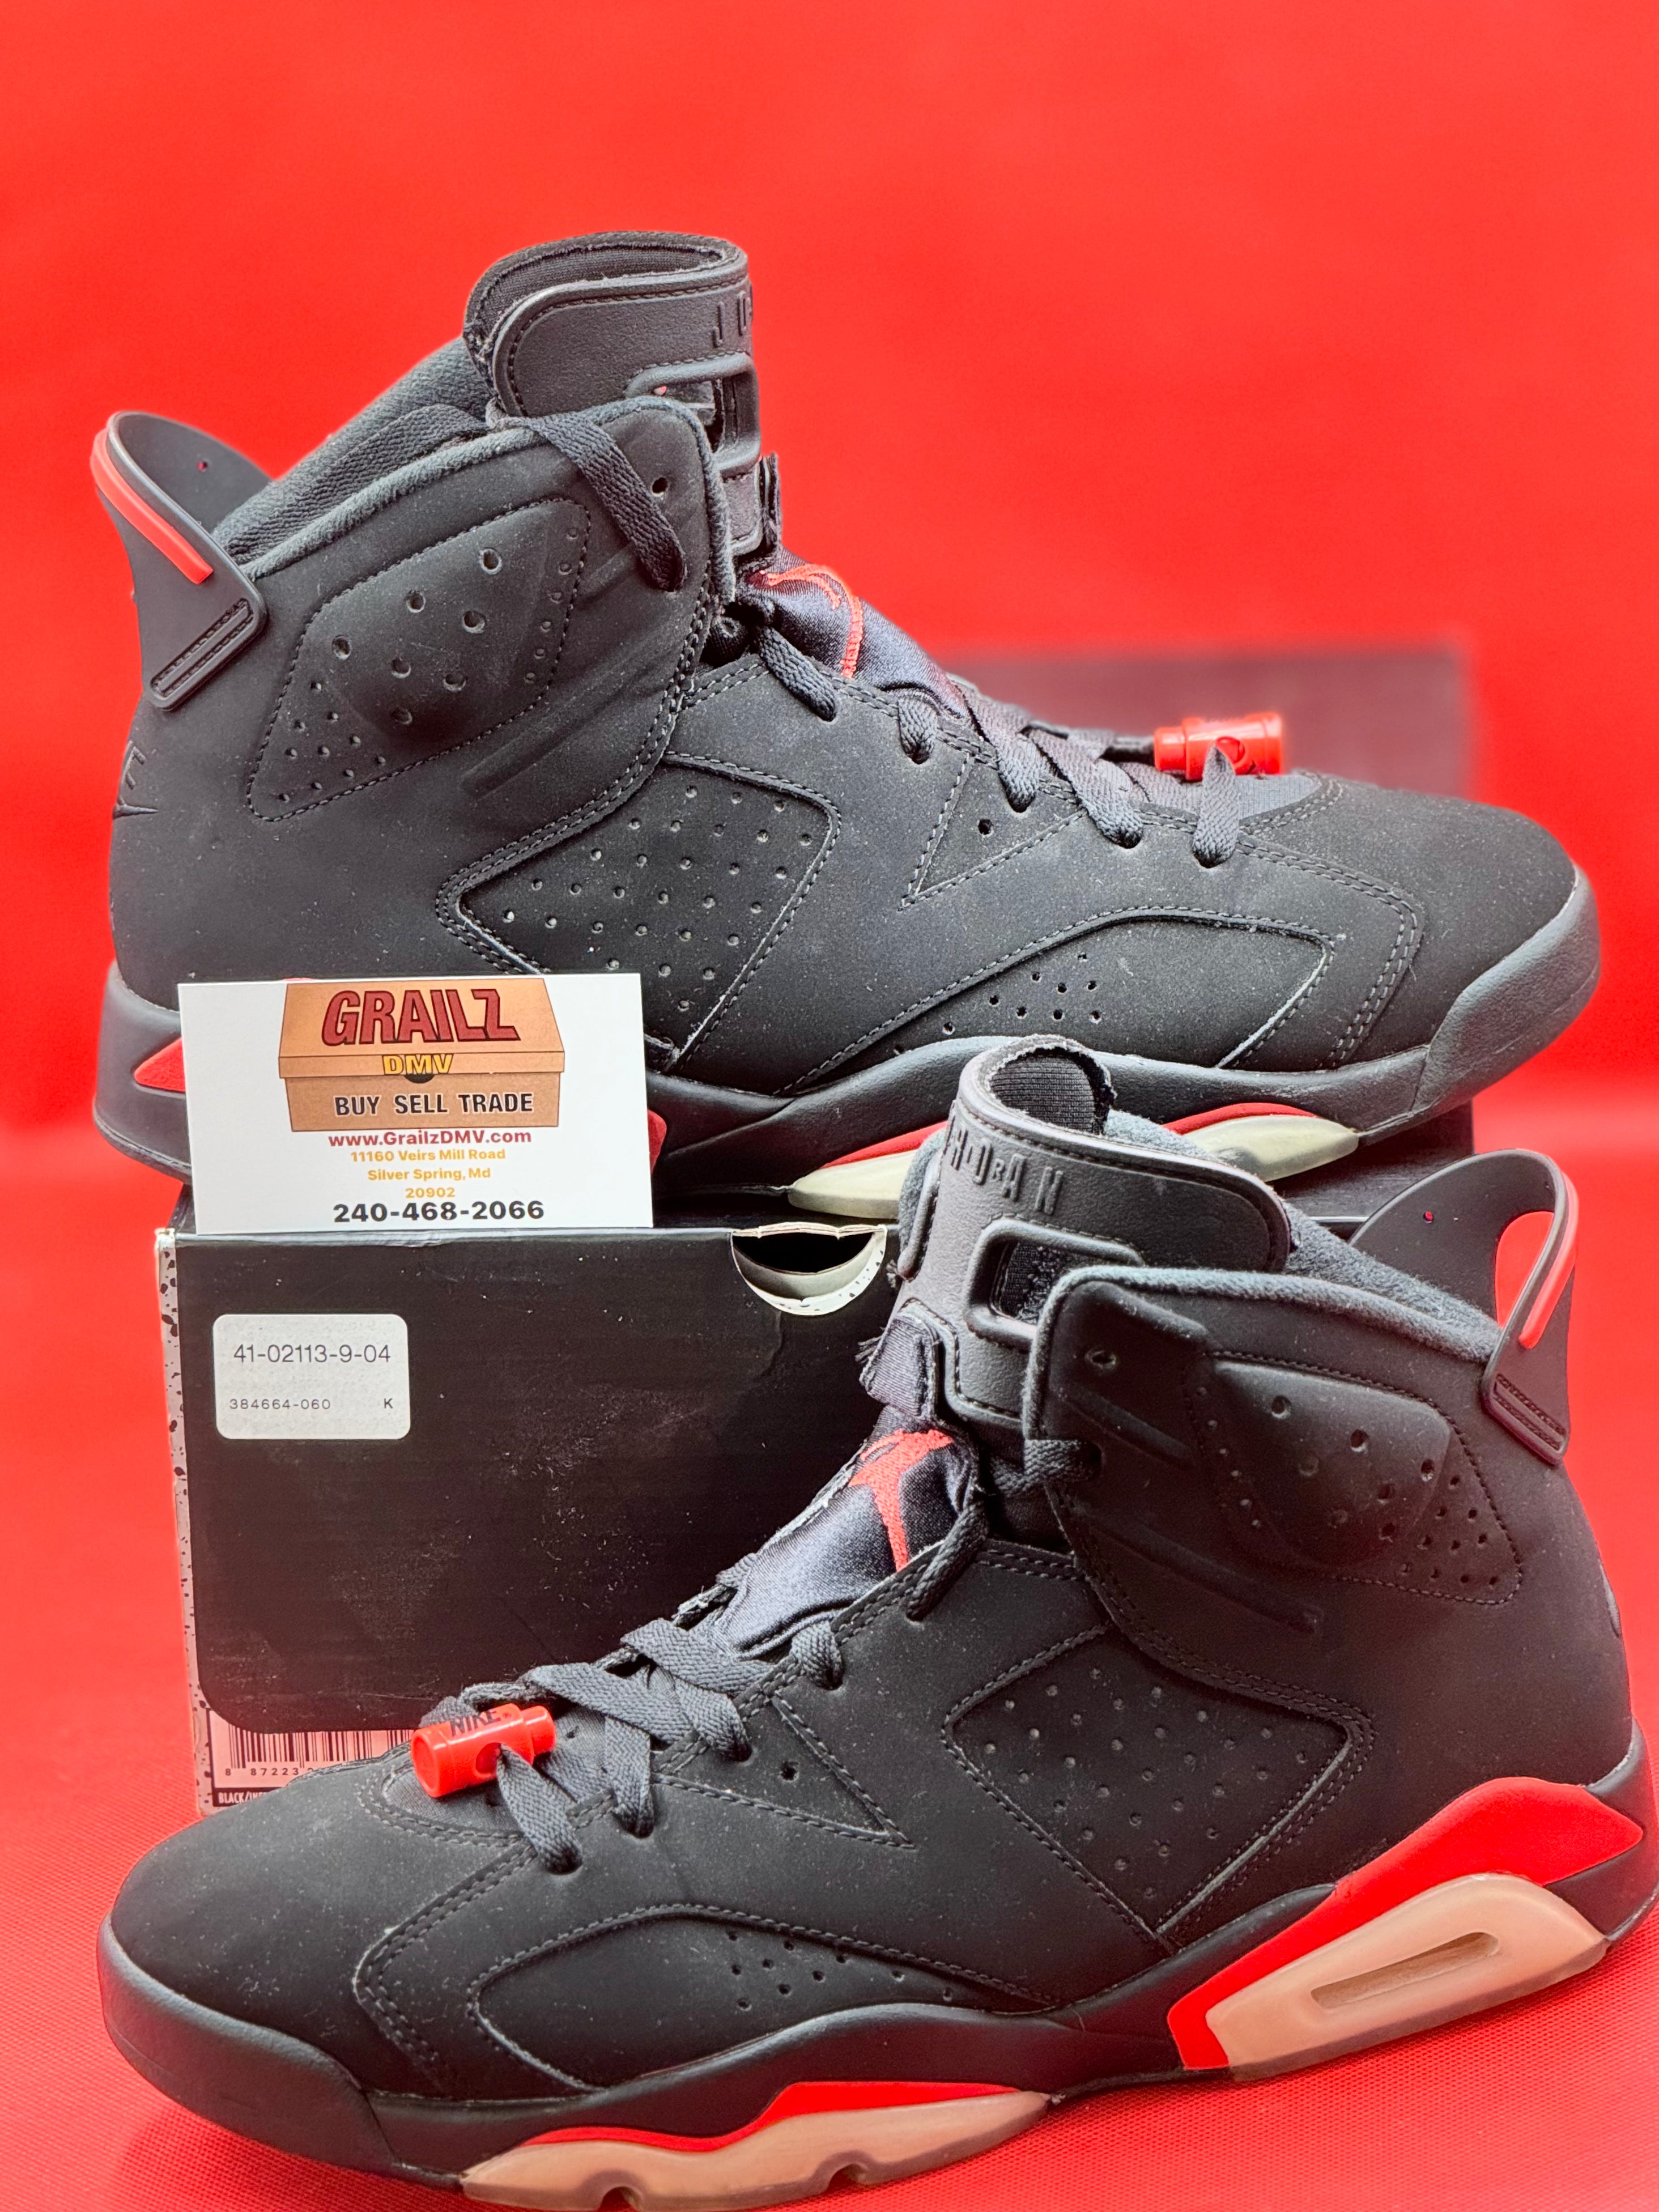 Infrared 6s Size 10.5